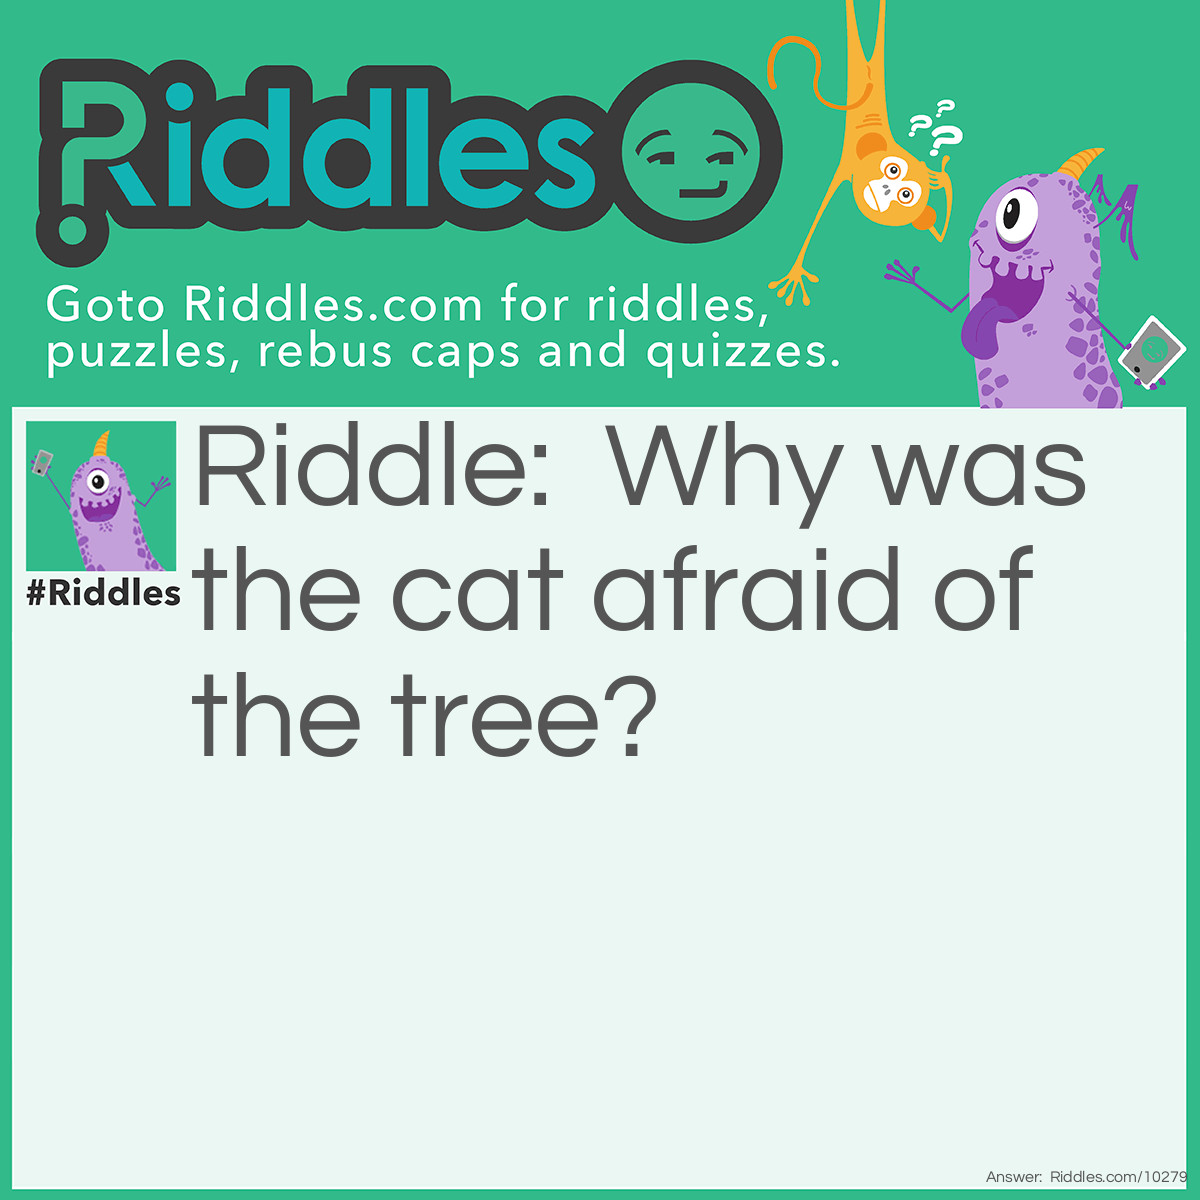 Riddle: Why was the cat afraid of the tree? Answer: Because of its bark!